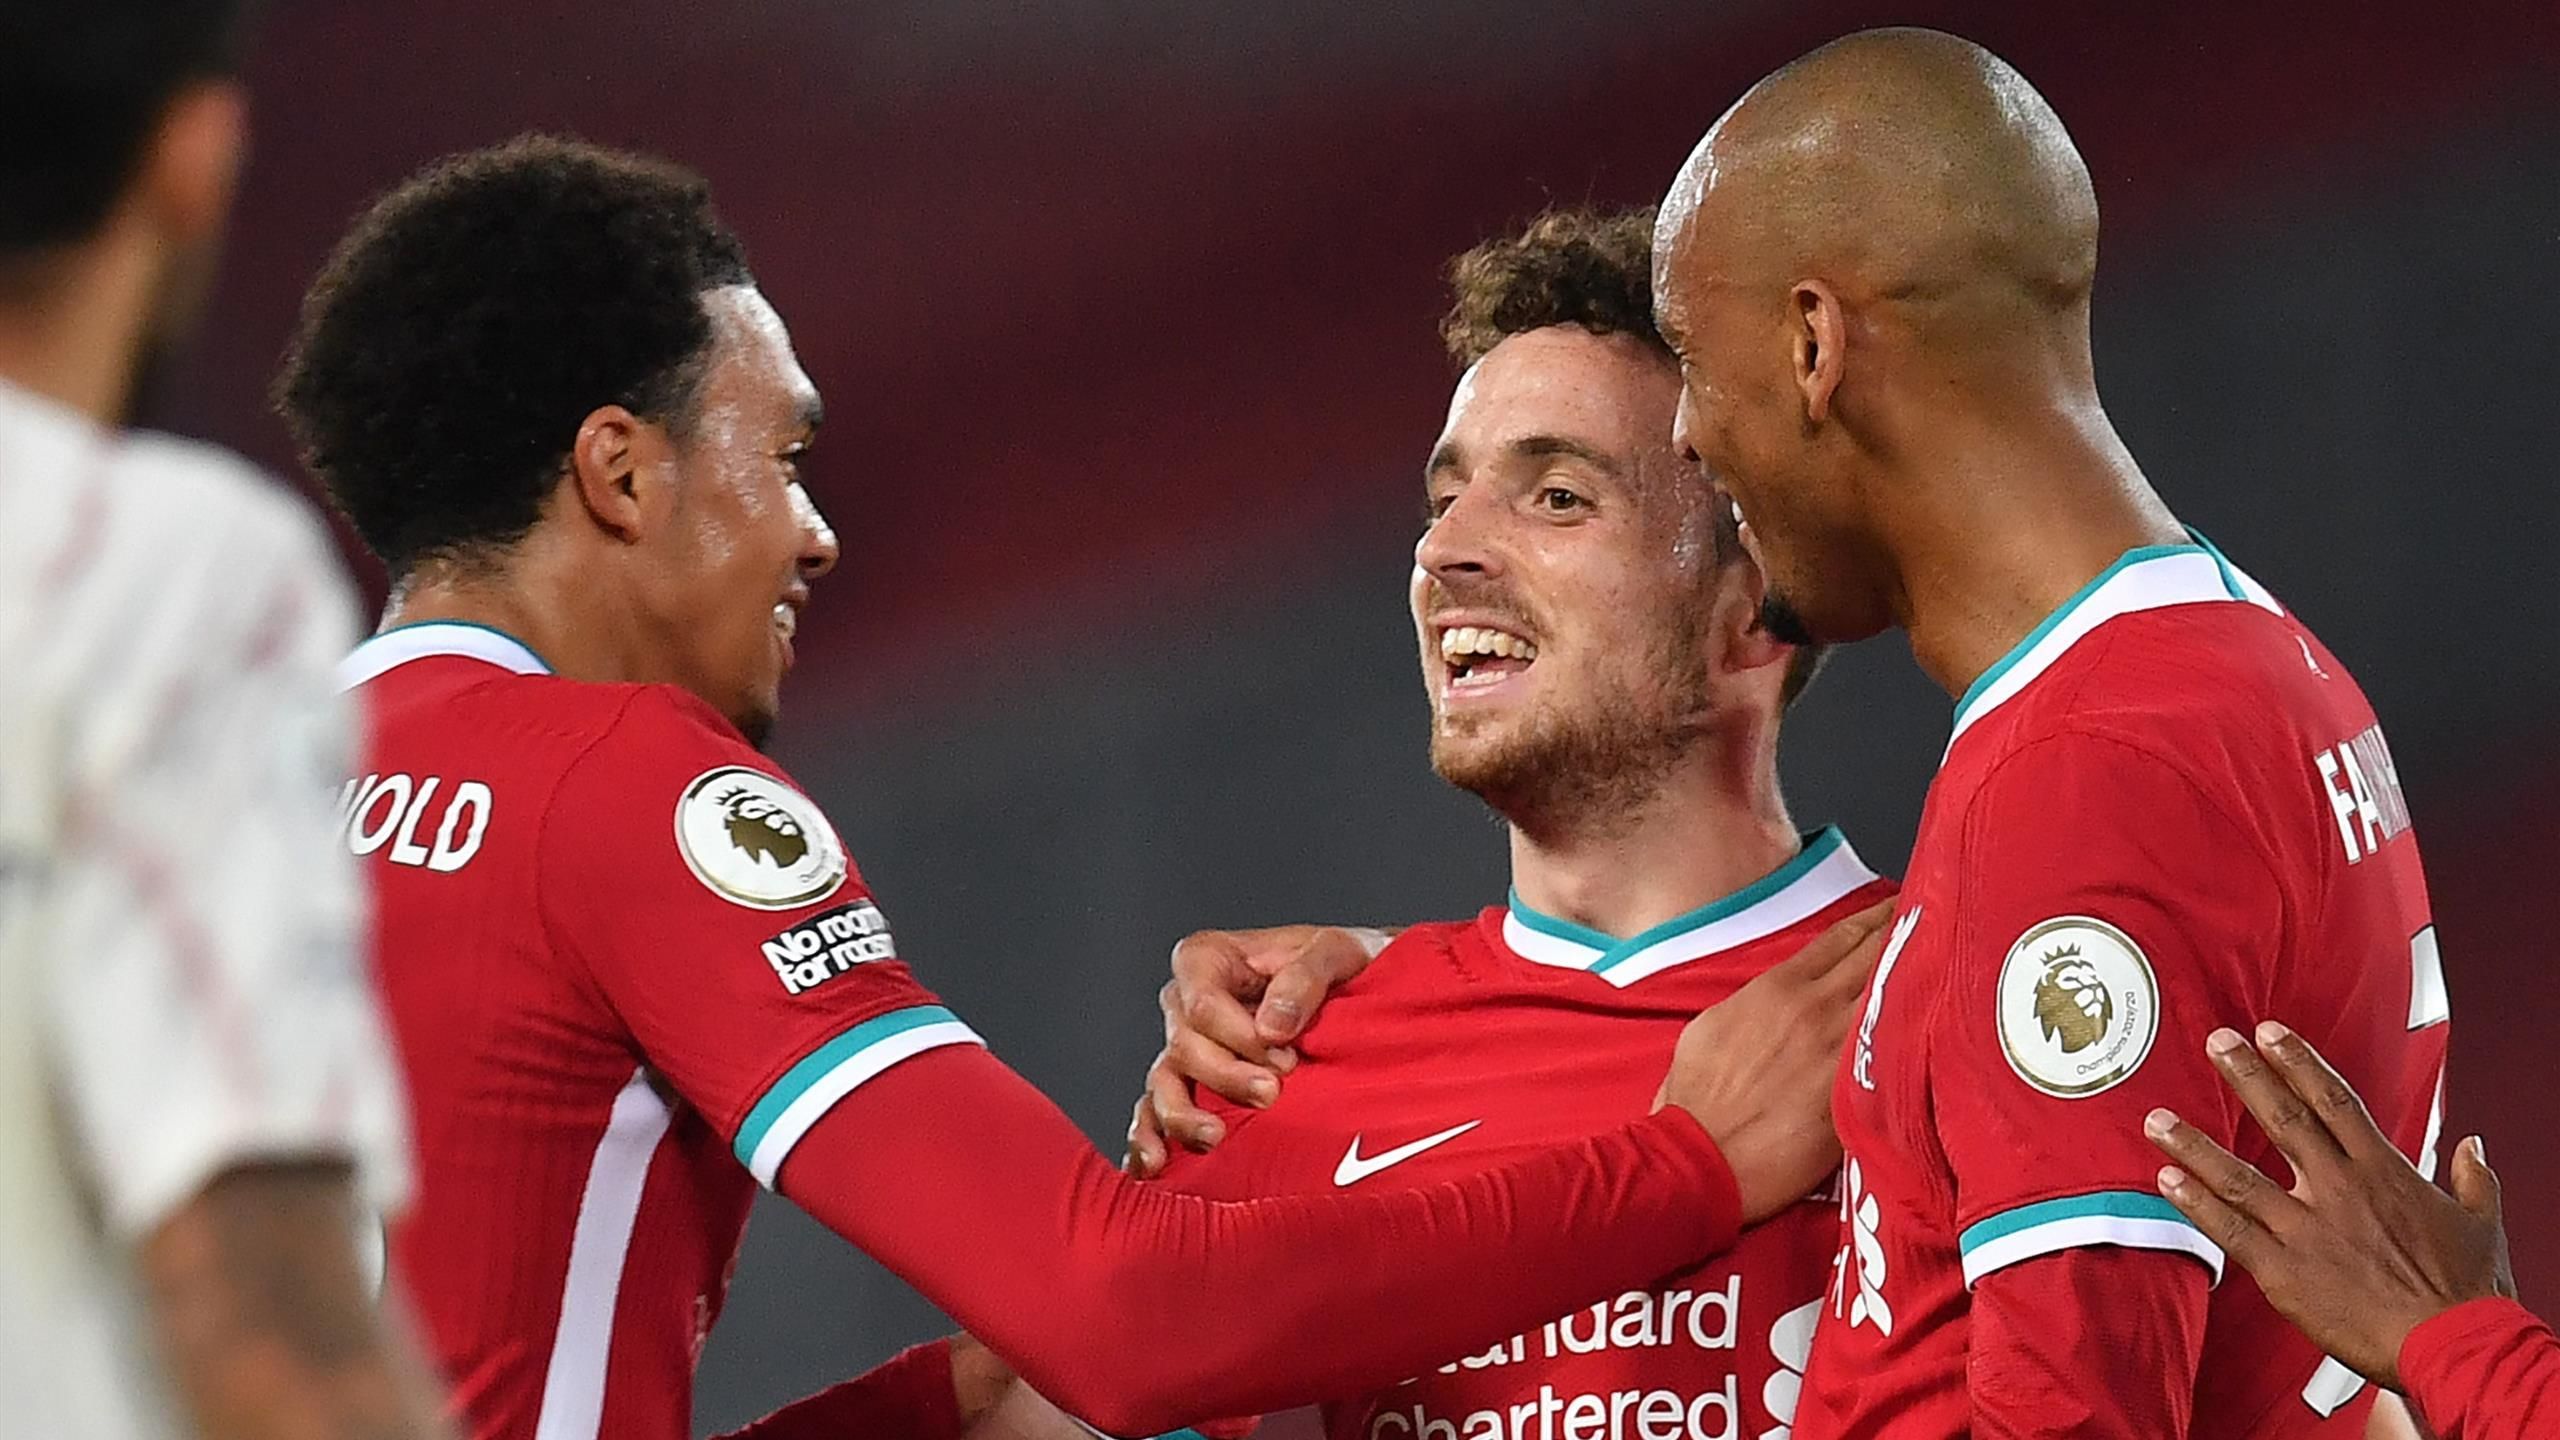 Liverpool ease past Arsenal, new signing Diogo Jota nets debut Reds goal